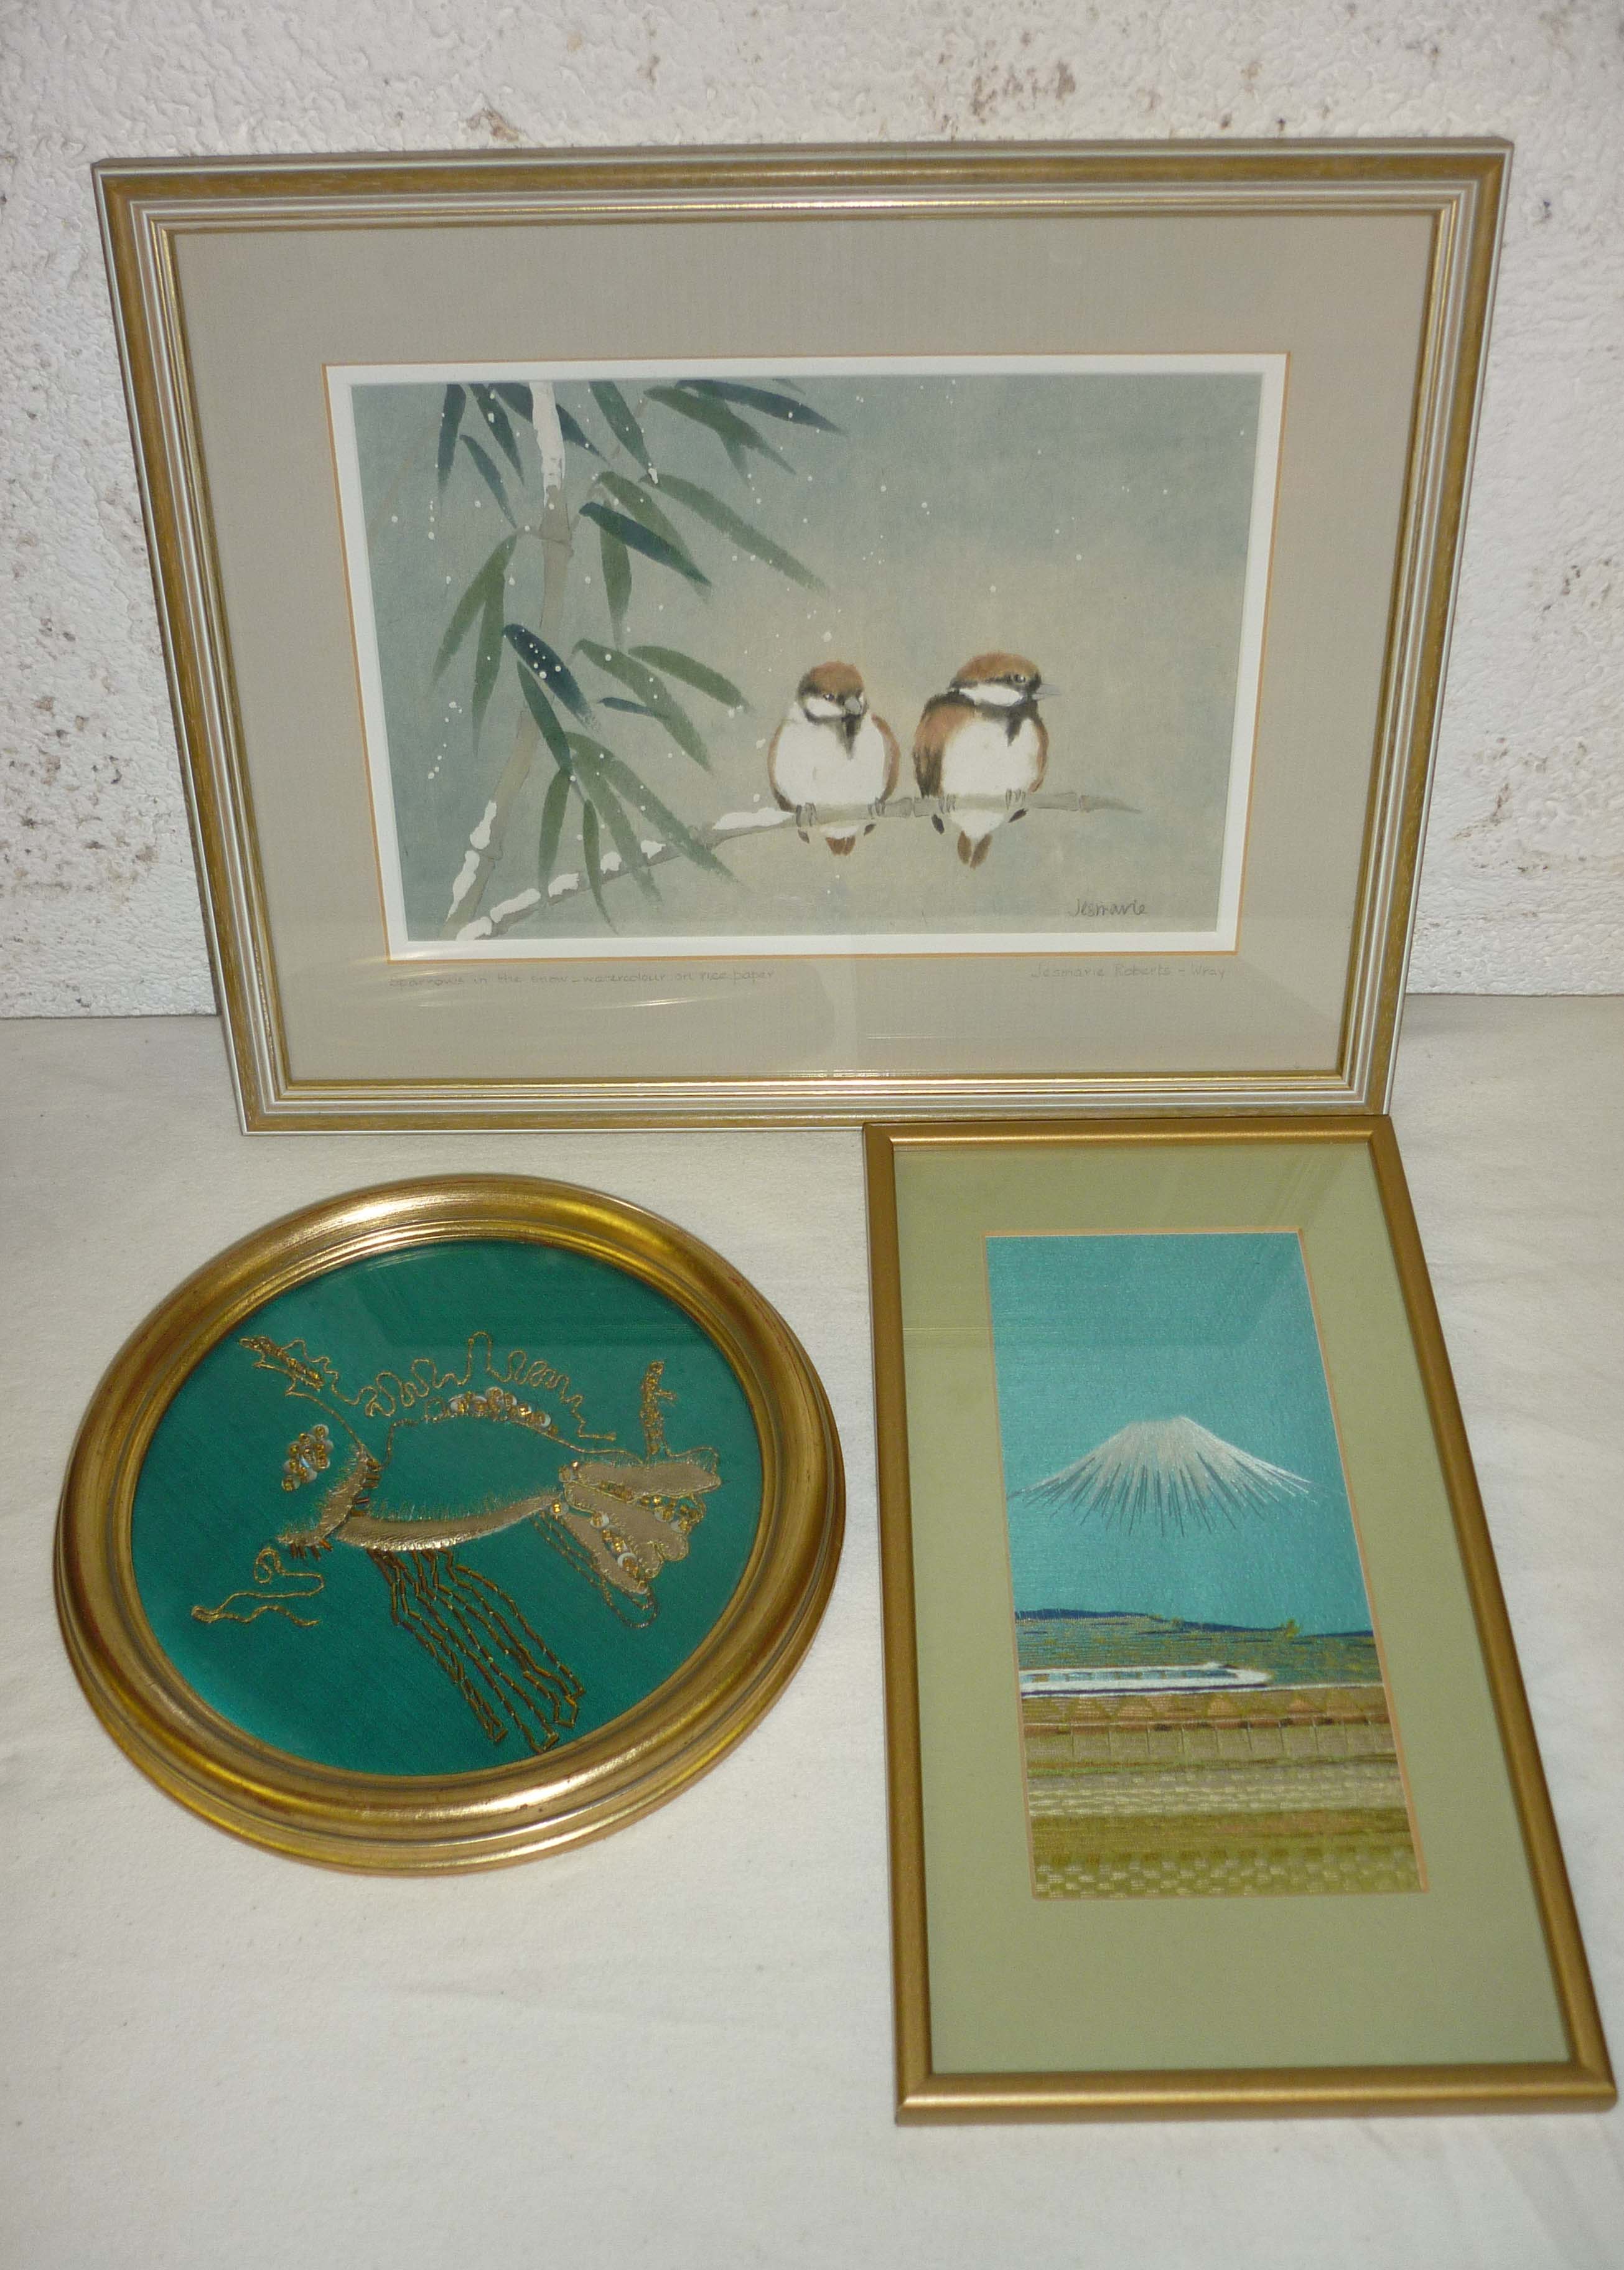 Framed sparrows in the snow watercolour on rice paper by Jesmarie Roberts-Wray plus two